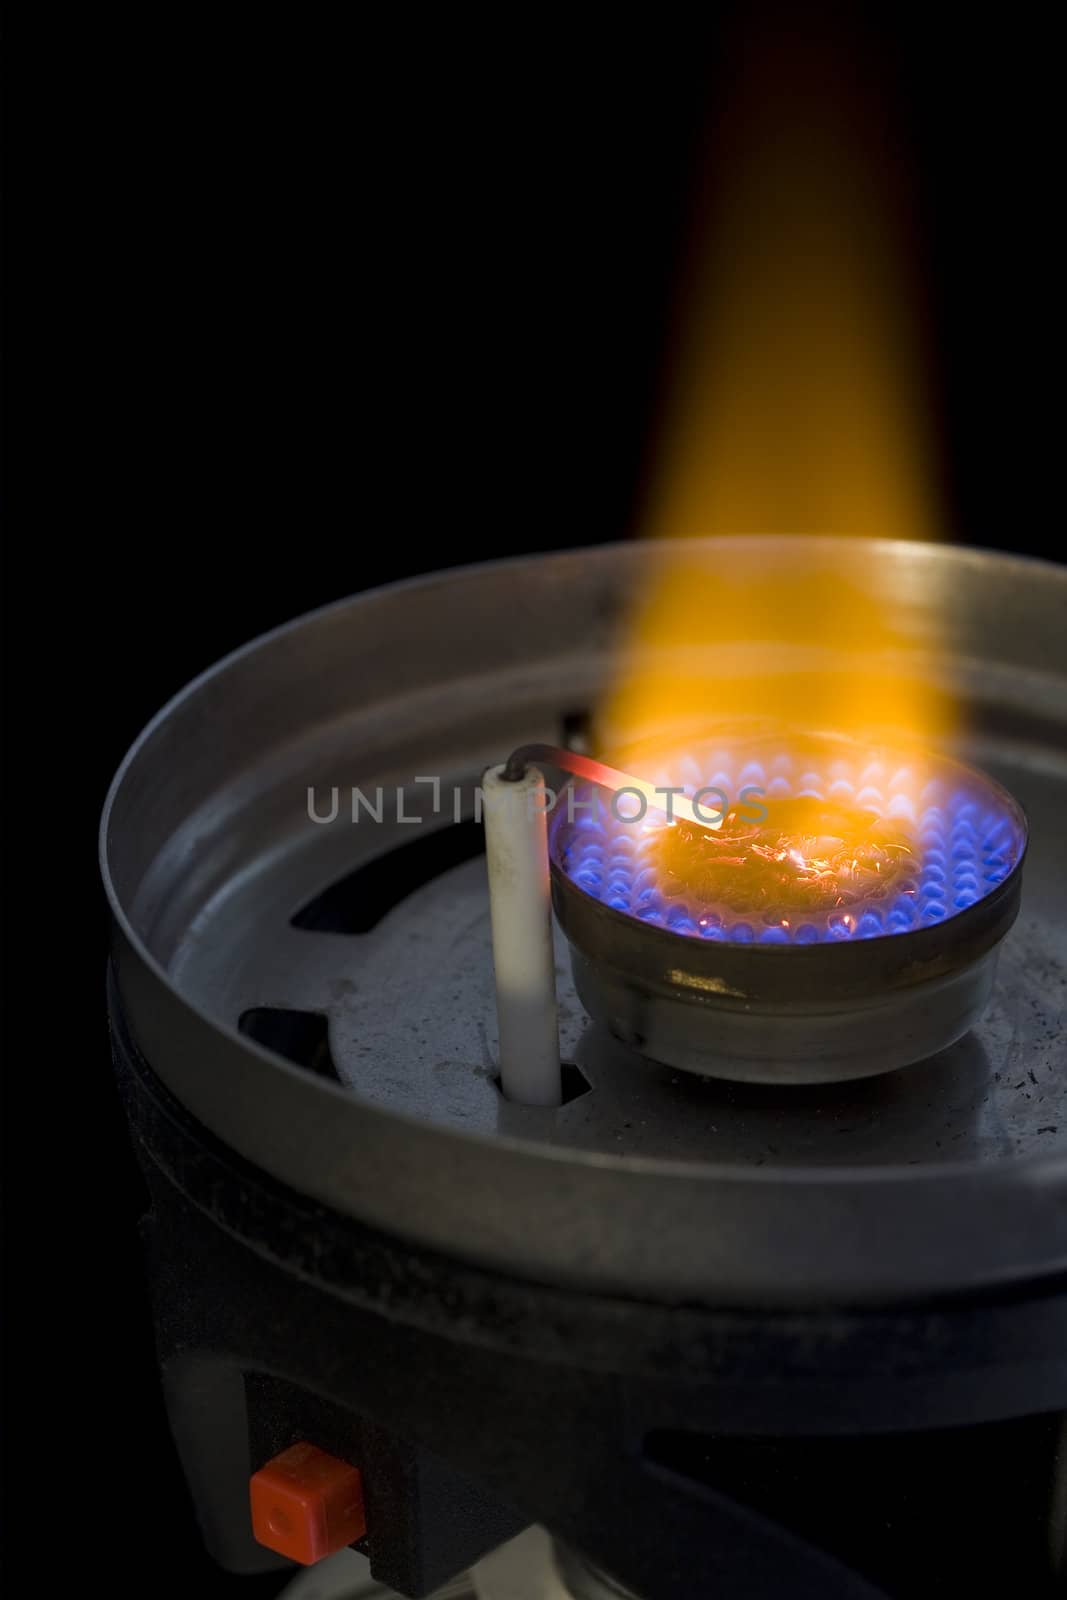 flame burner of camping or backpacking stove with a piezoelectric igniter against black background